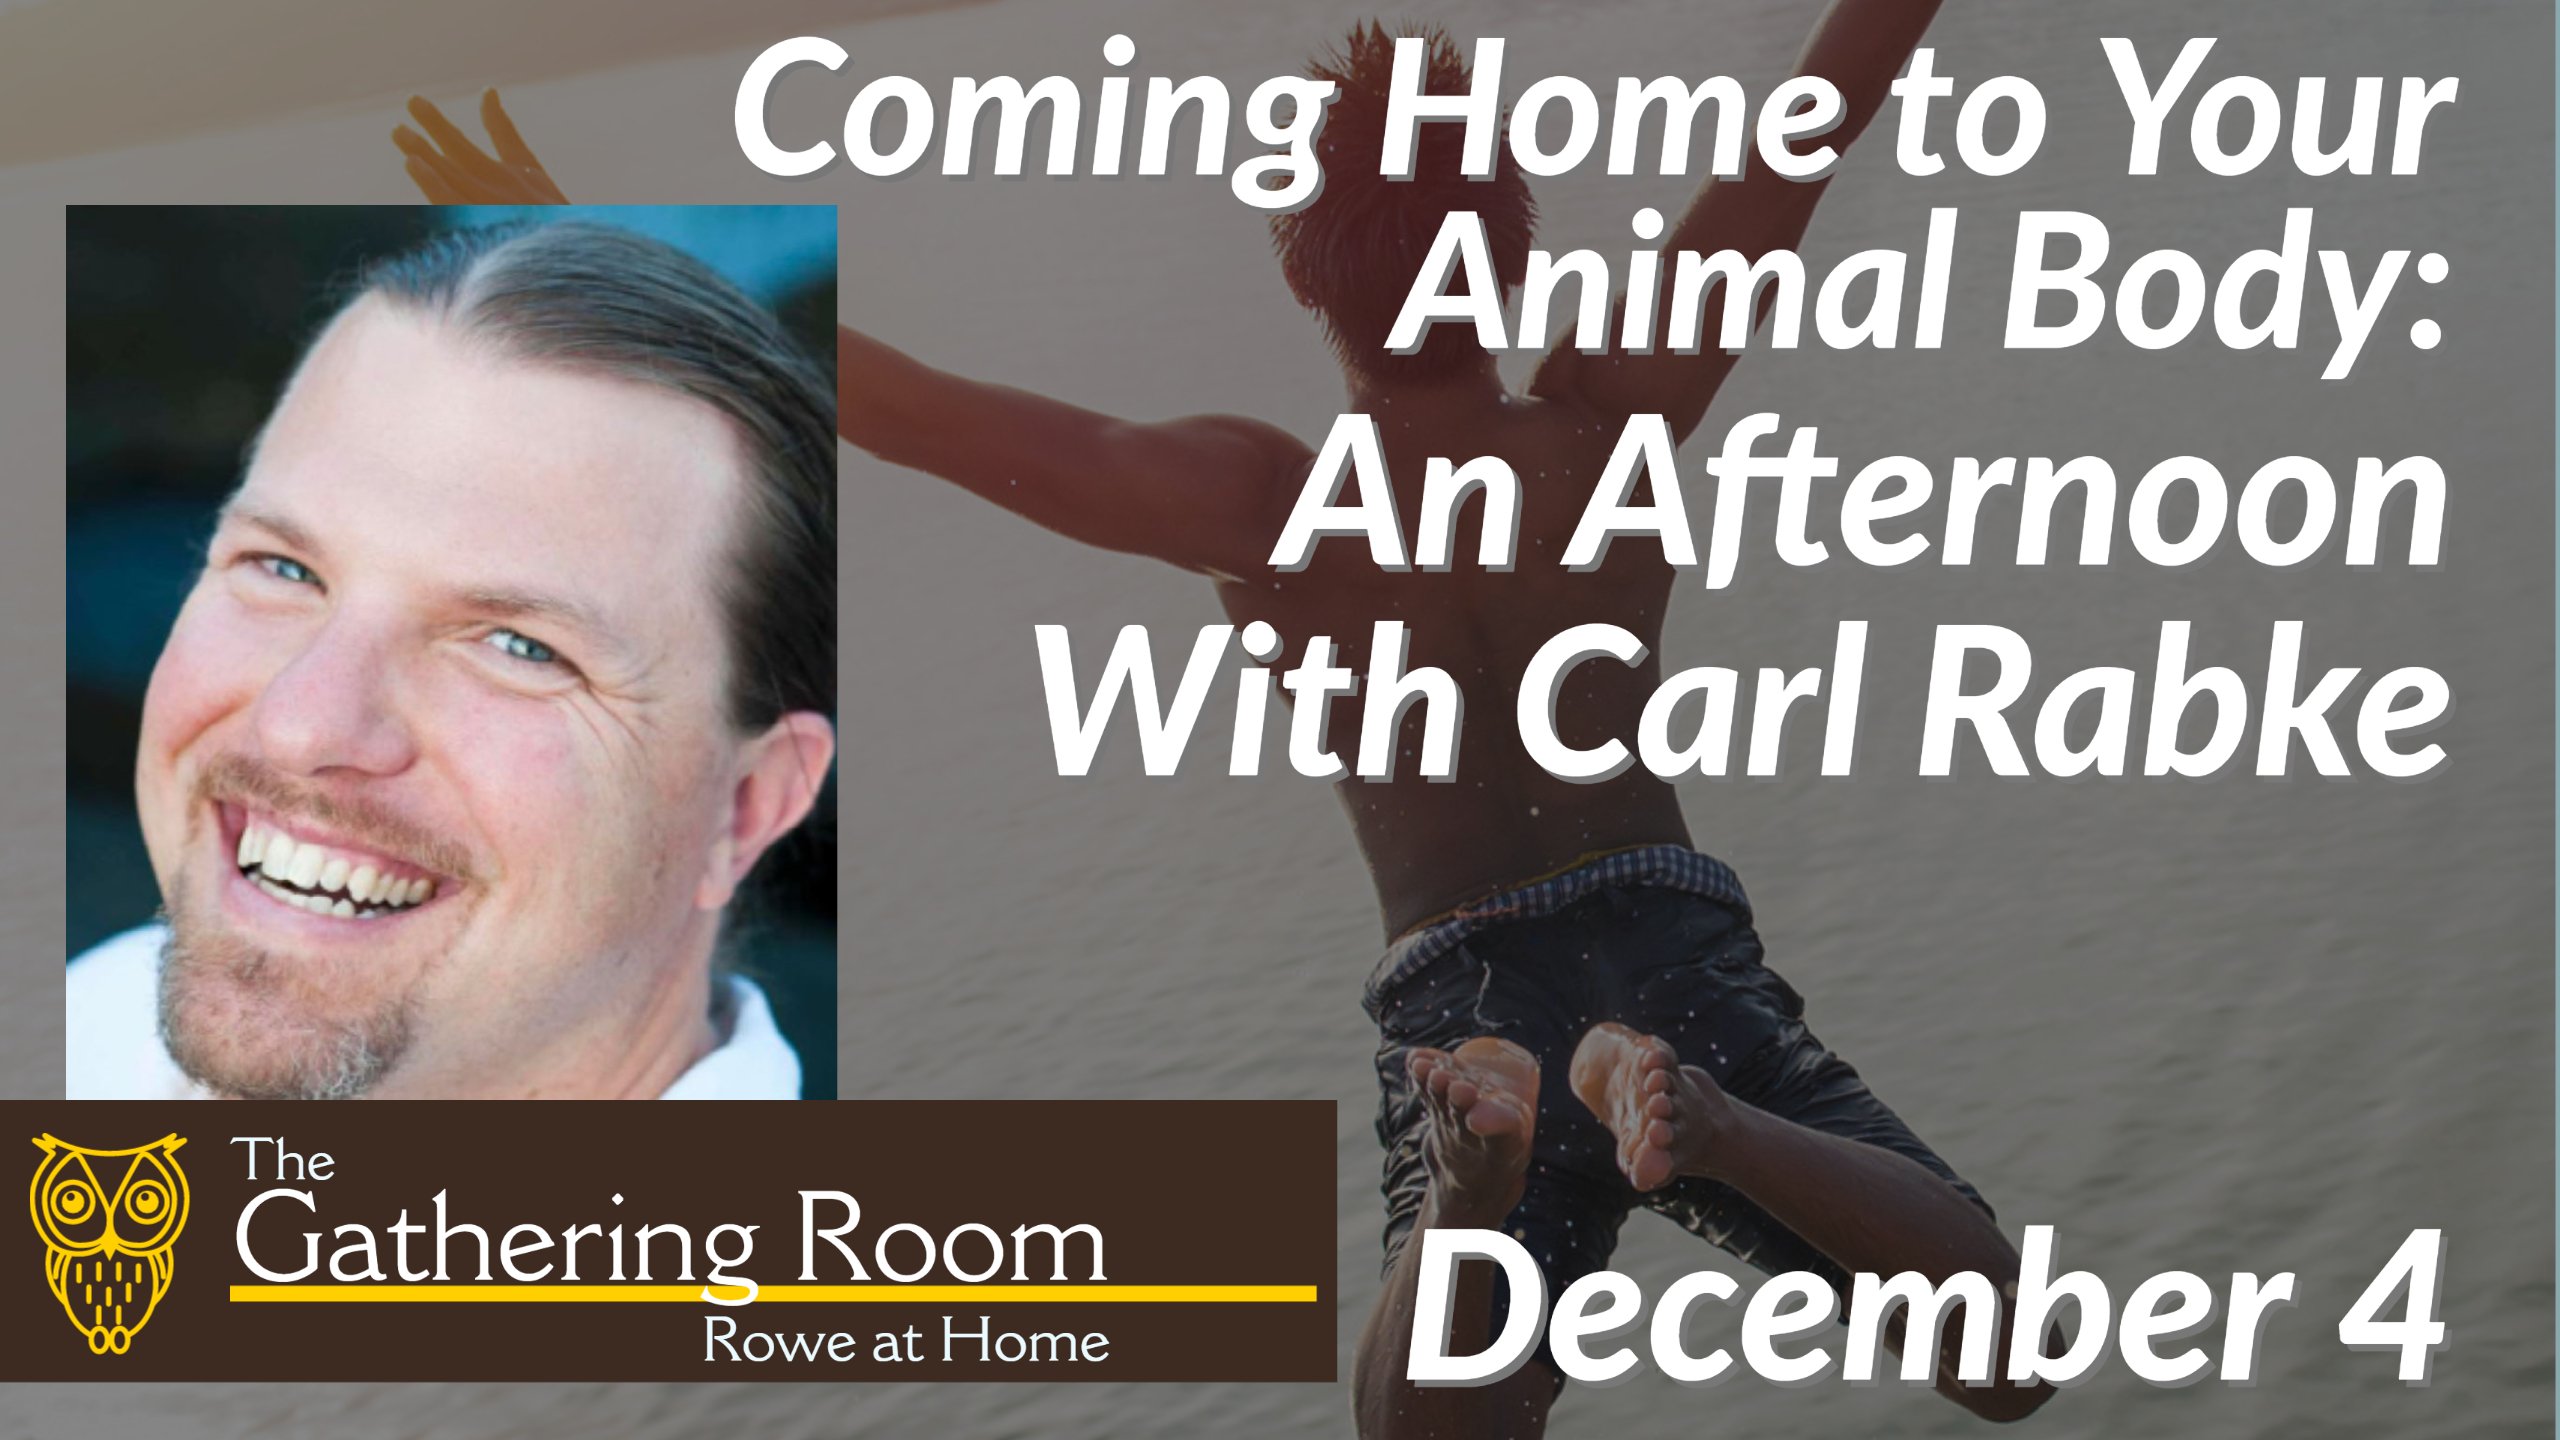 Coming Home to Your Animal Body: An Afternoon with Carl Rabke